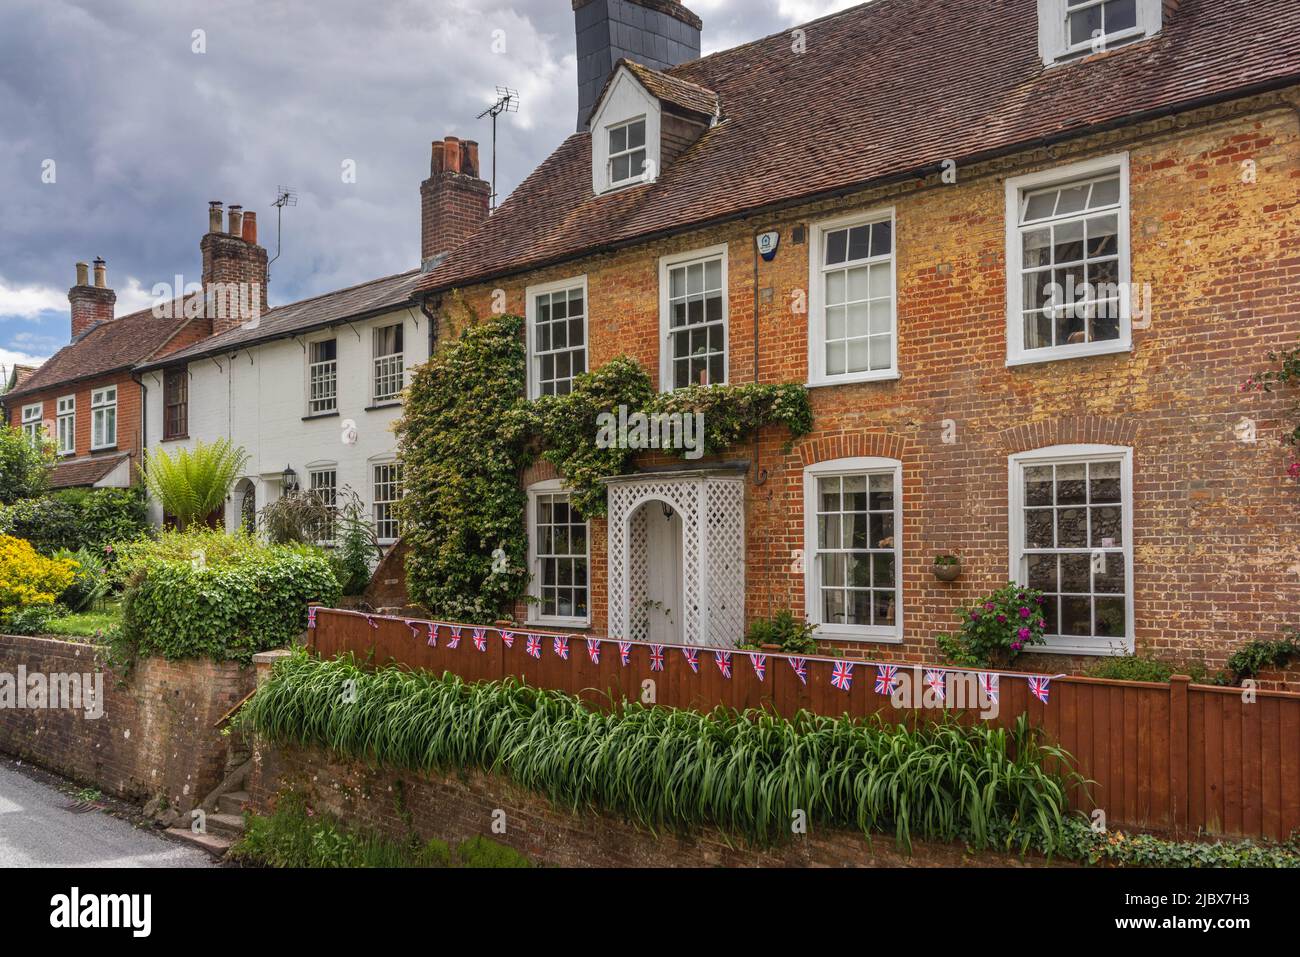 A row of quaint English cottages with Union Jack bunting along Eling Hill in Eling - Totton, Southampton, England, UK Stock Photo